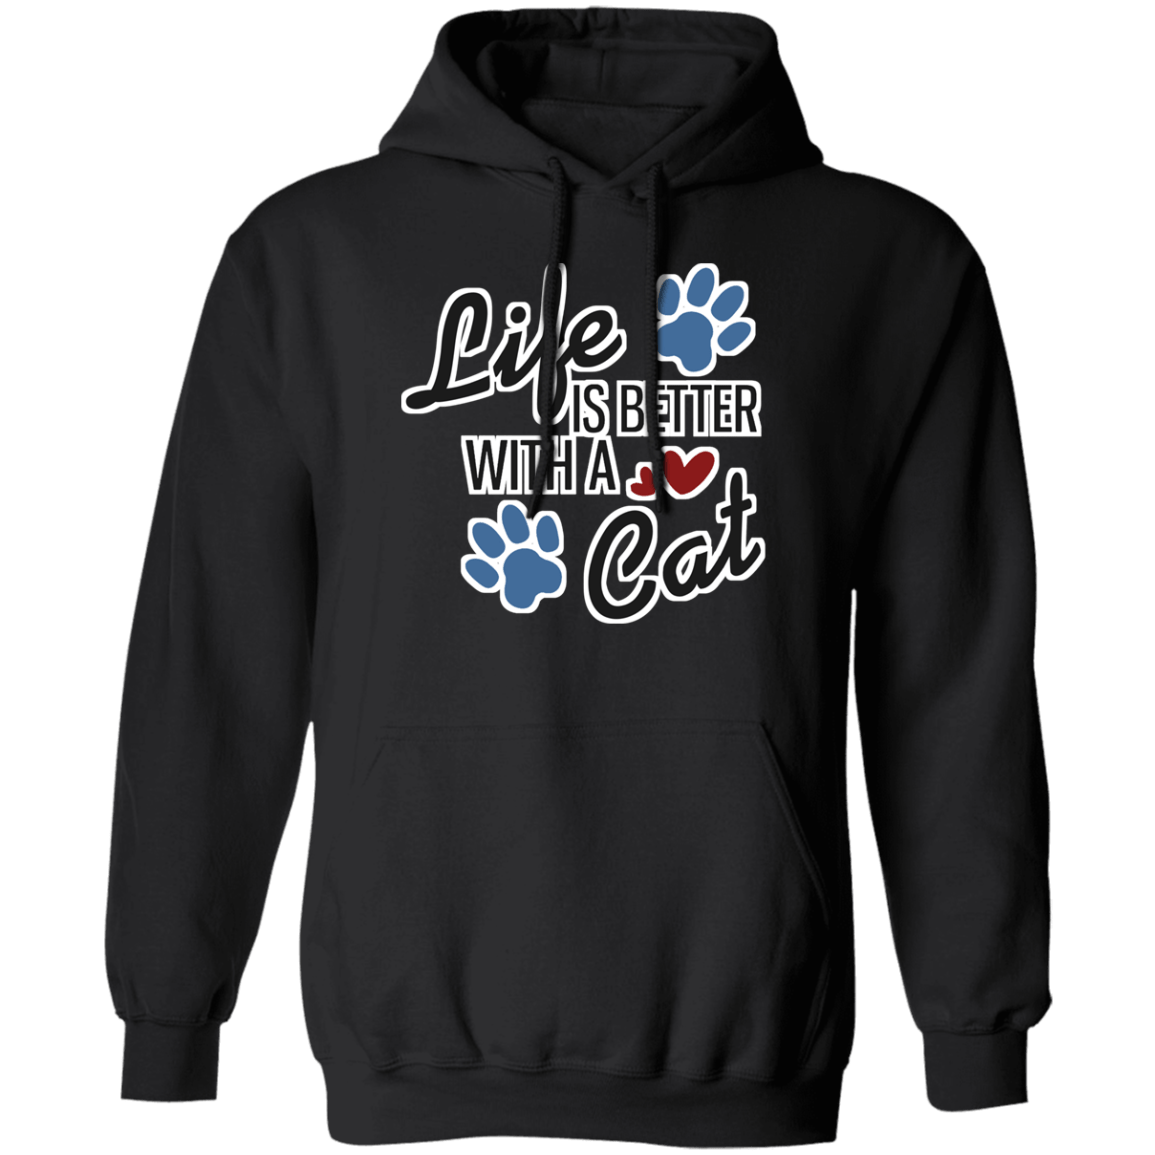 Life is Better with a Cat - Hoodie.